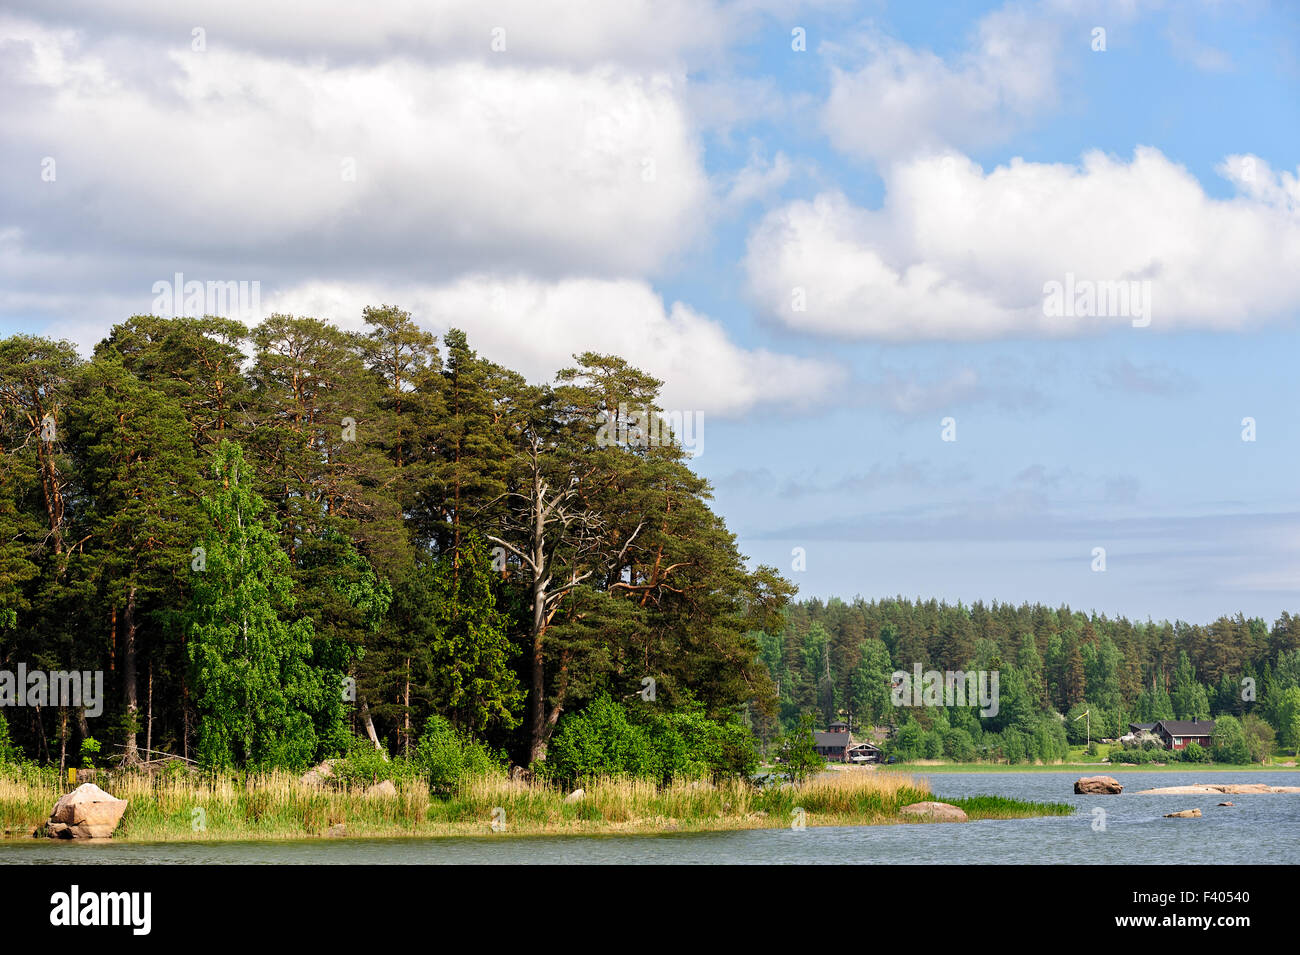 Forest on islands in finland gulf Stock Photo